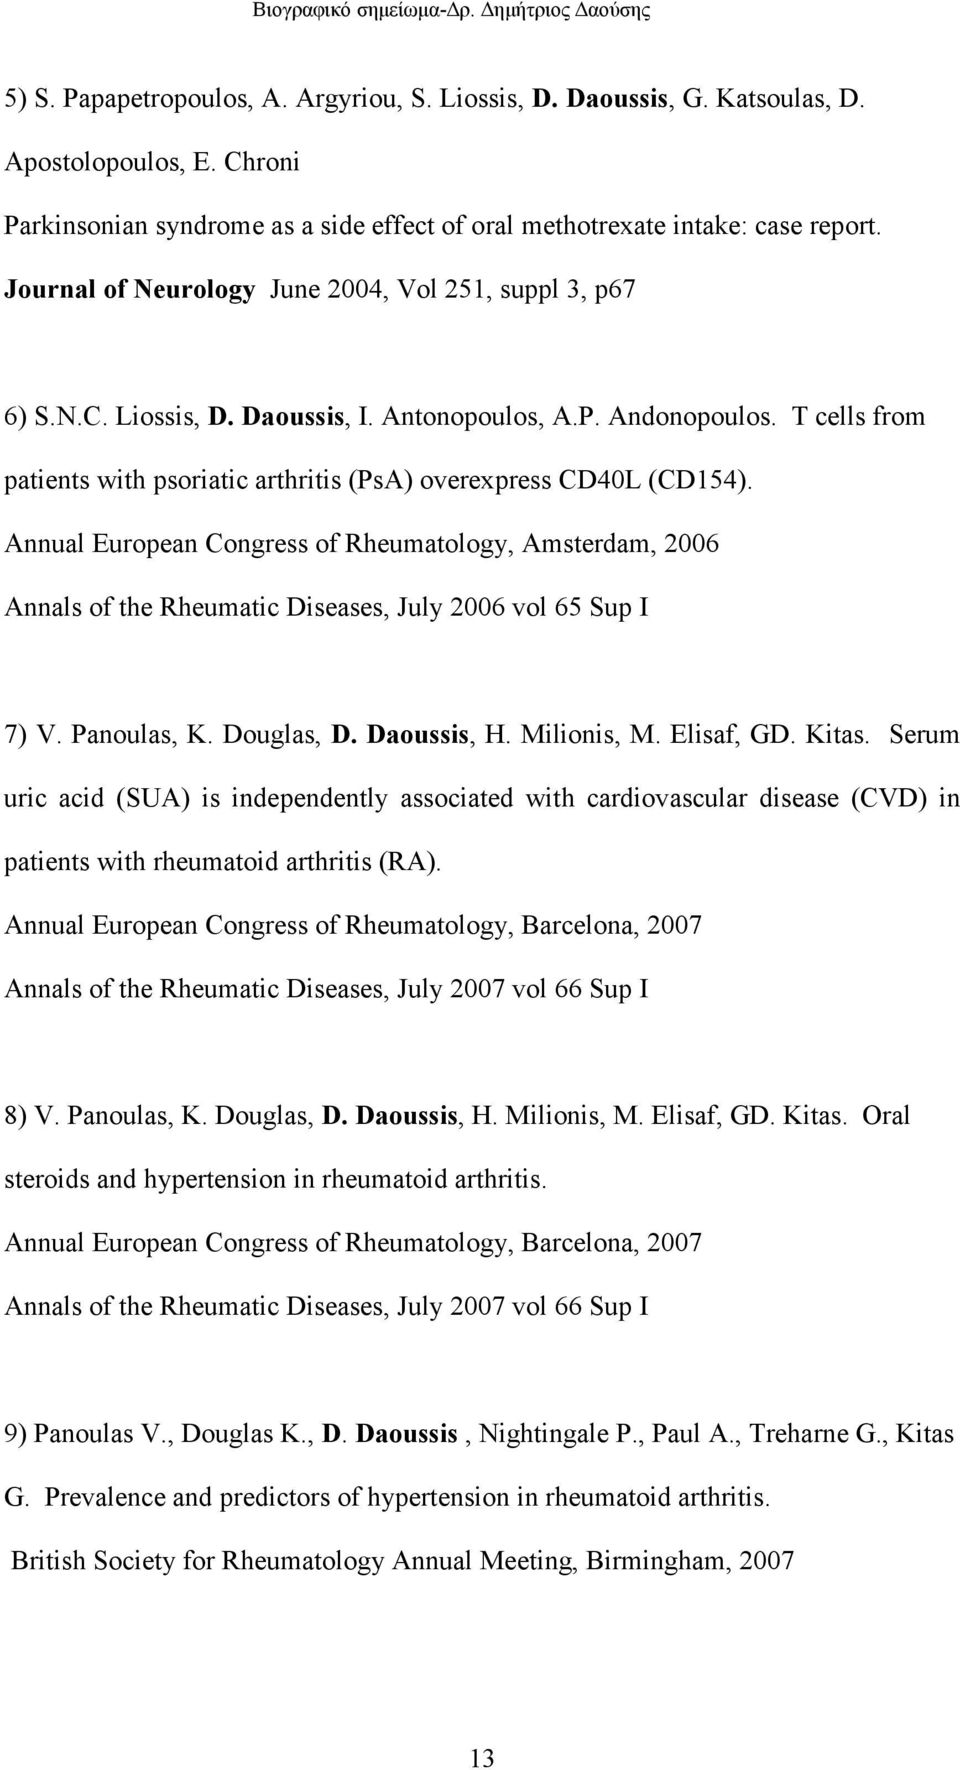 T cells from patients with psoriatic arthritis (PsA) overexpress CD40L (CD154). Annual European Congress of Rheumatology, Amsterdam, 2006 Annals of the Rheumatic Diseases, July 2006 vol 65 Sup I 7) V.